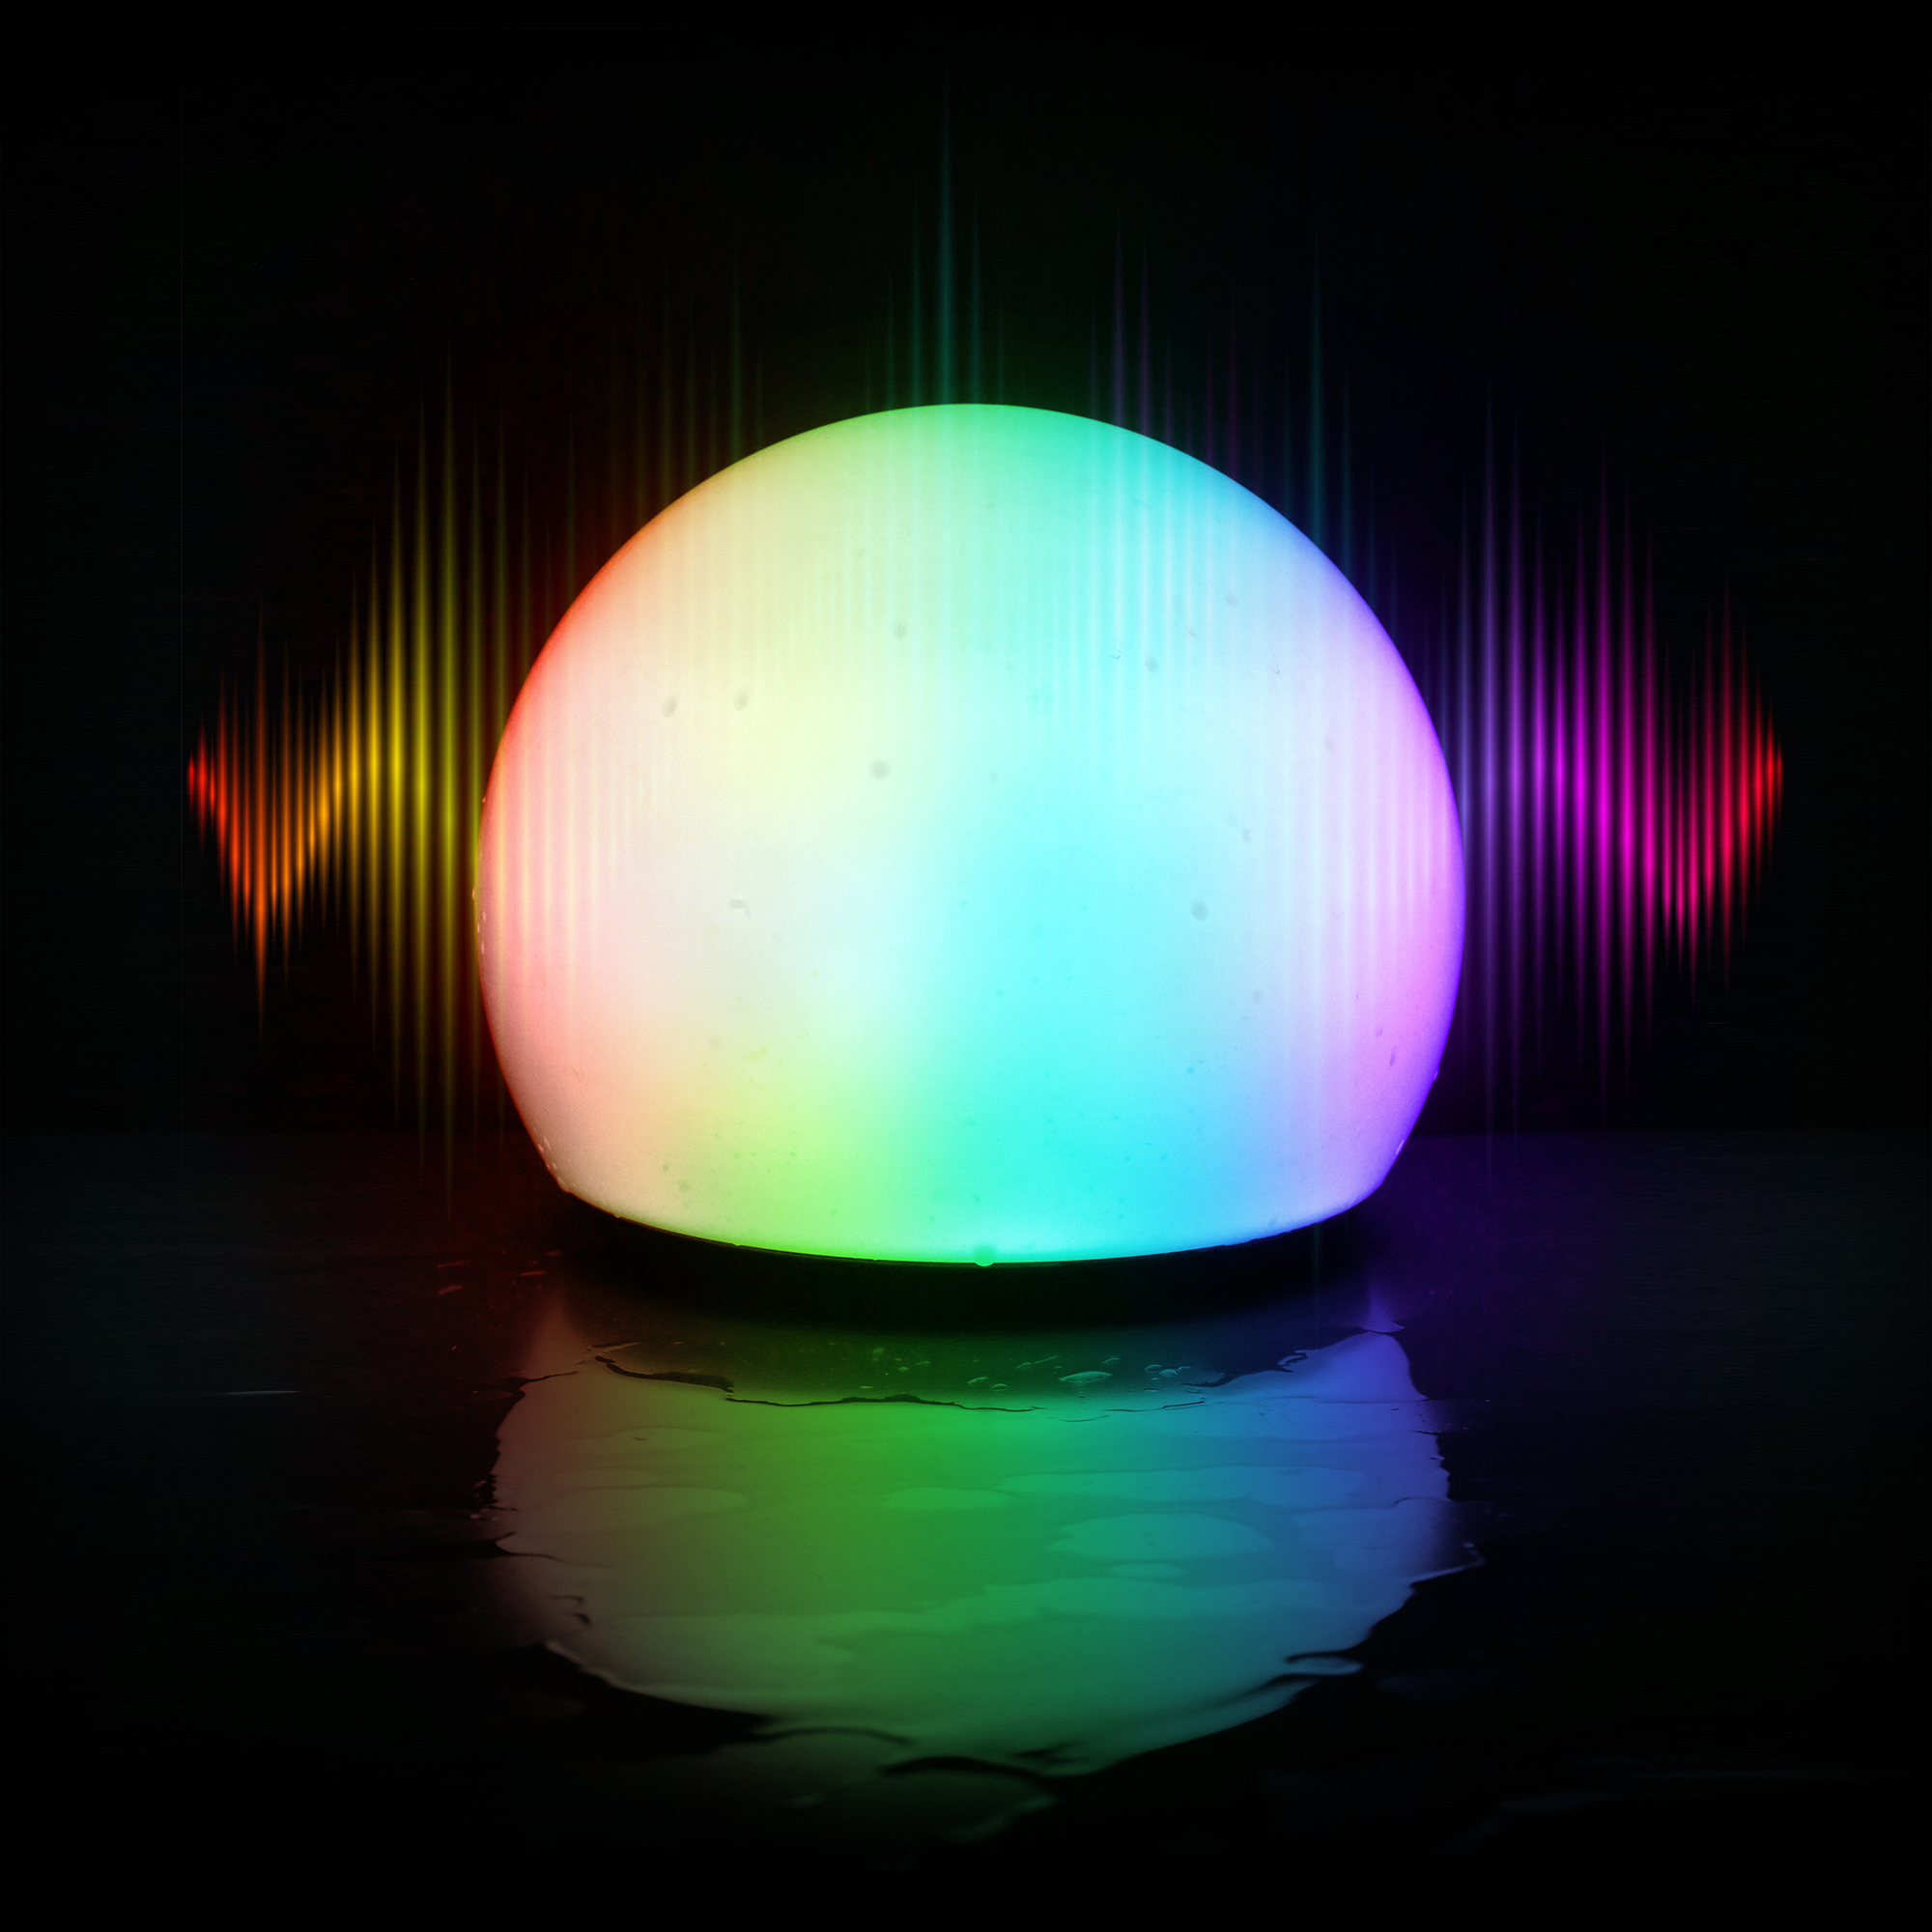 Monster LED 7-inch Orb Color Flow Smart Portable LED Light Ball, Indoor/Outdoor Use, Mobile App Control - image 4 of 6